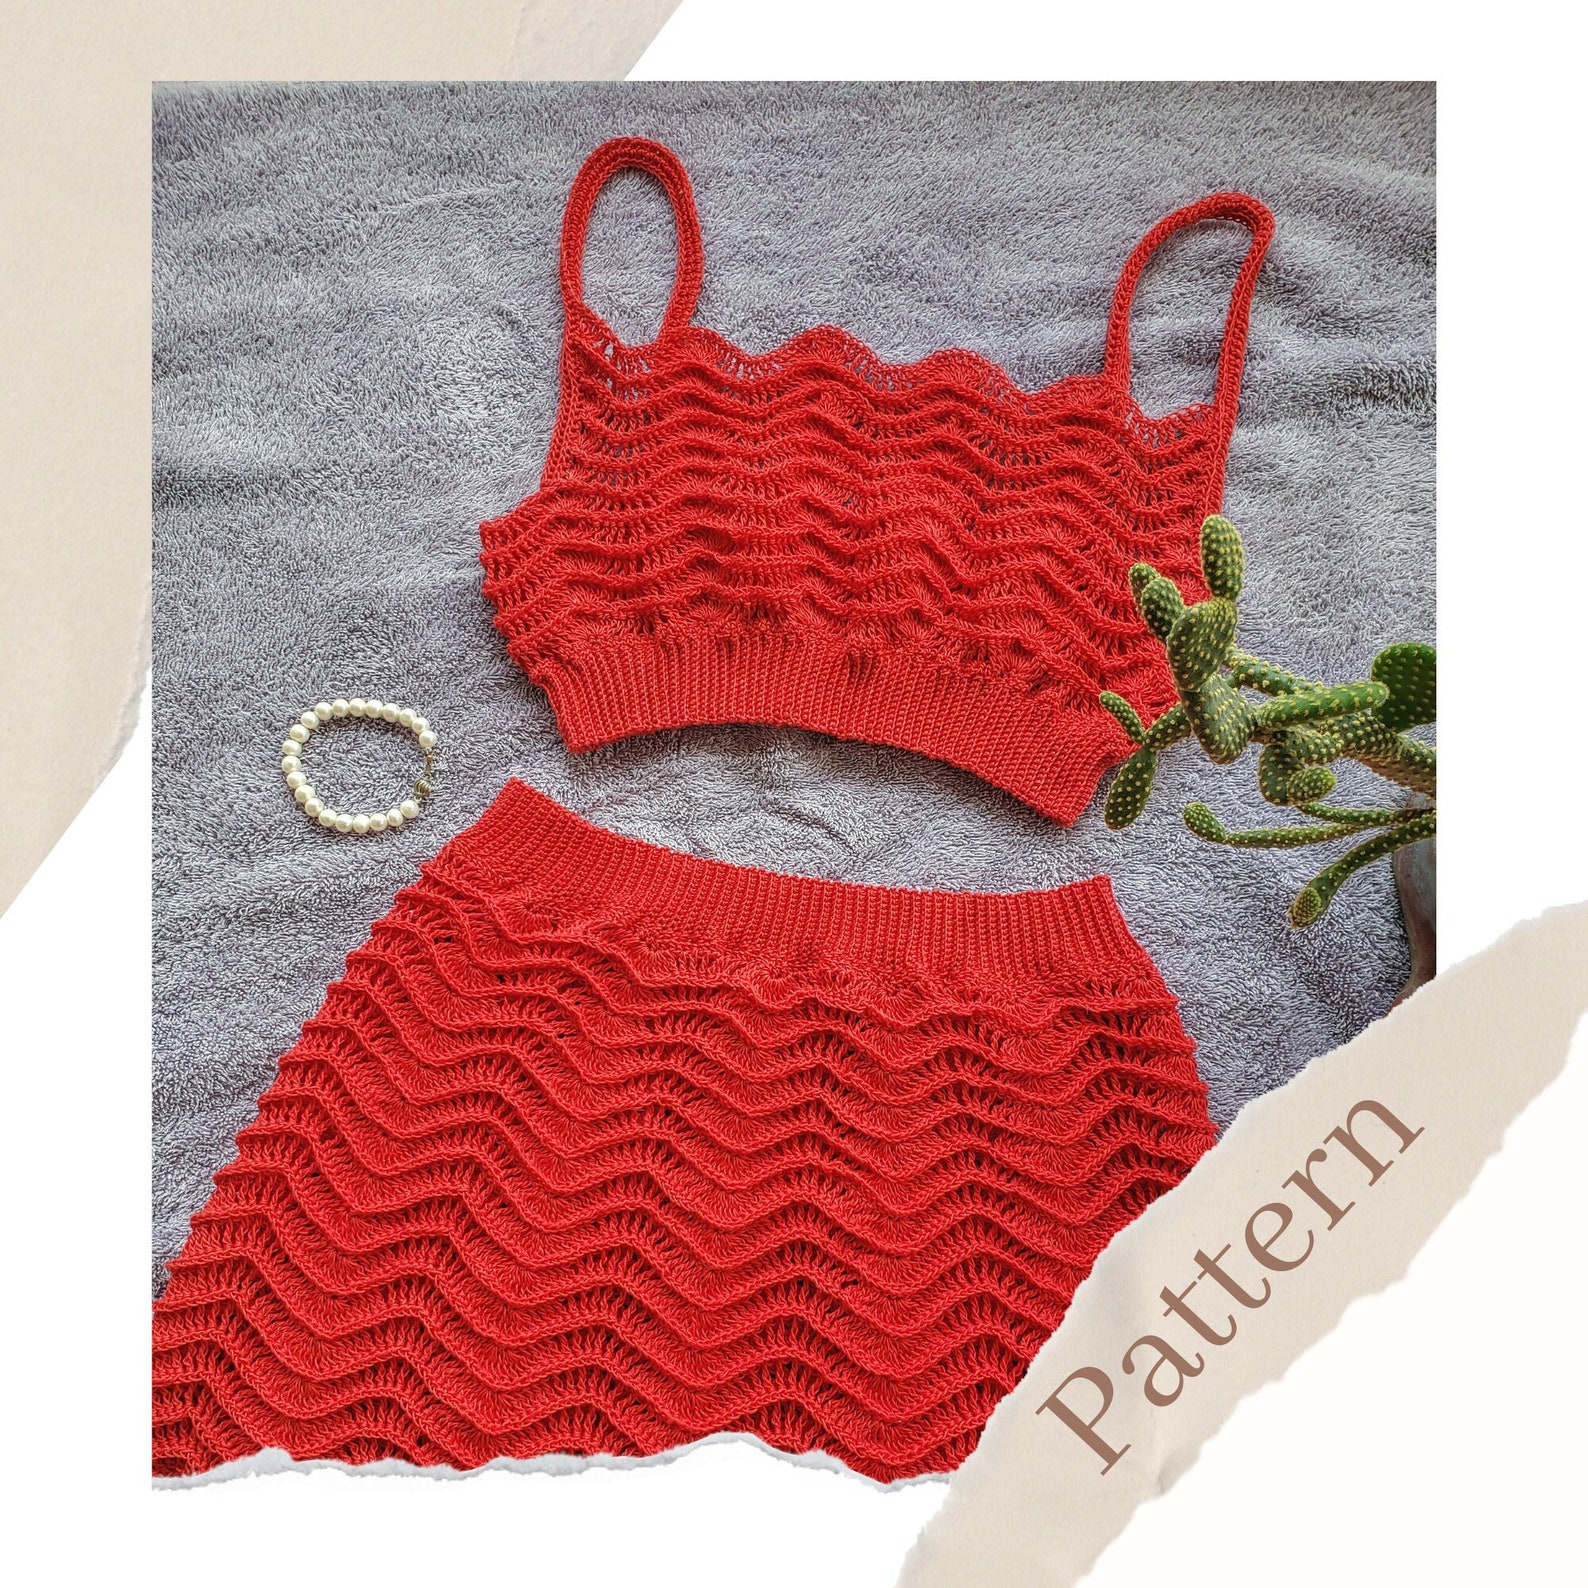 A red-orange tank top and skirt set. It is solid colored and has a wavy stitch pattern.